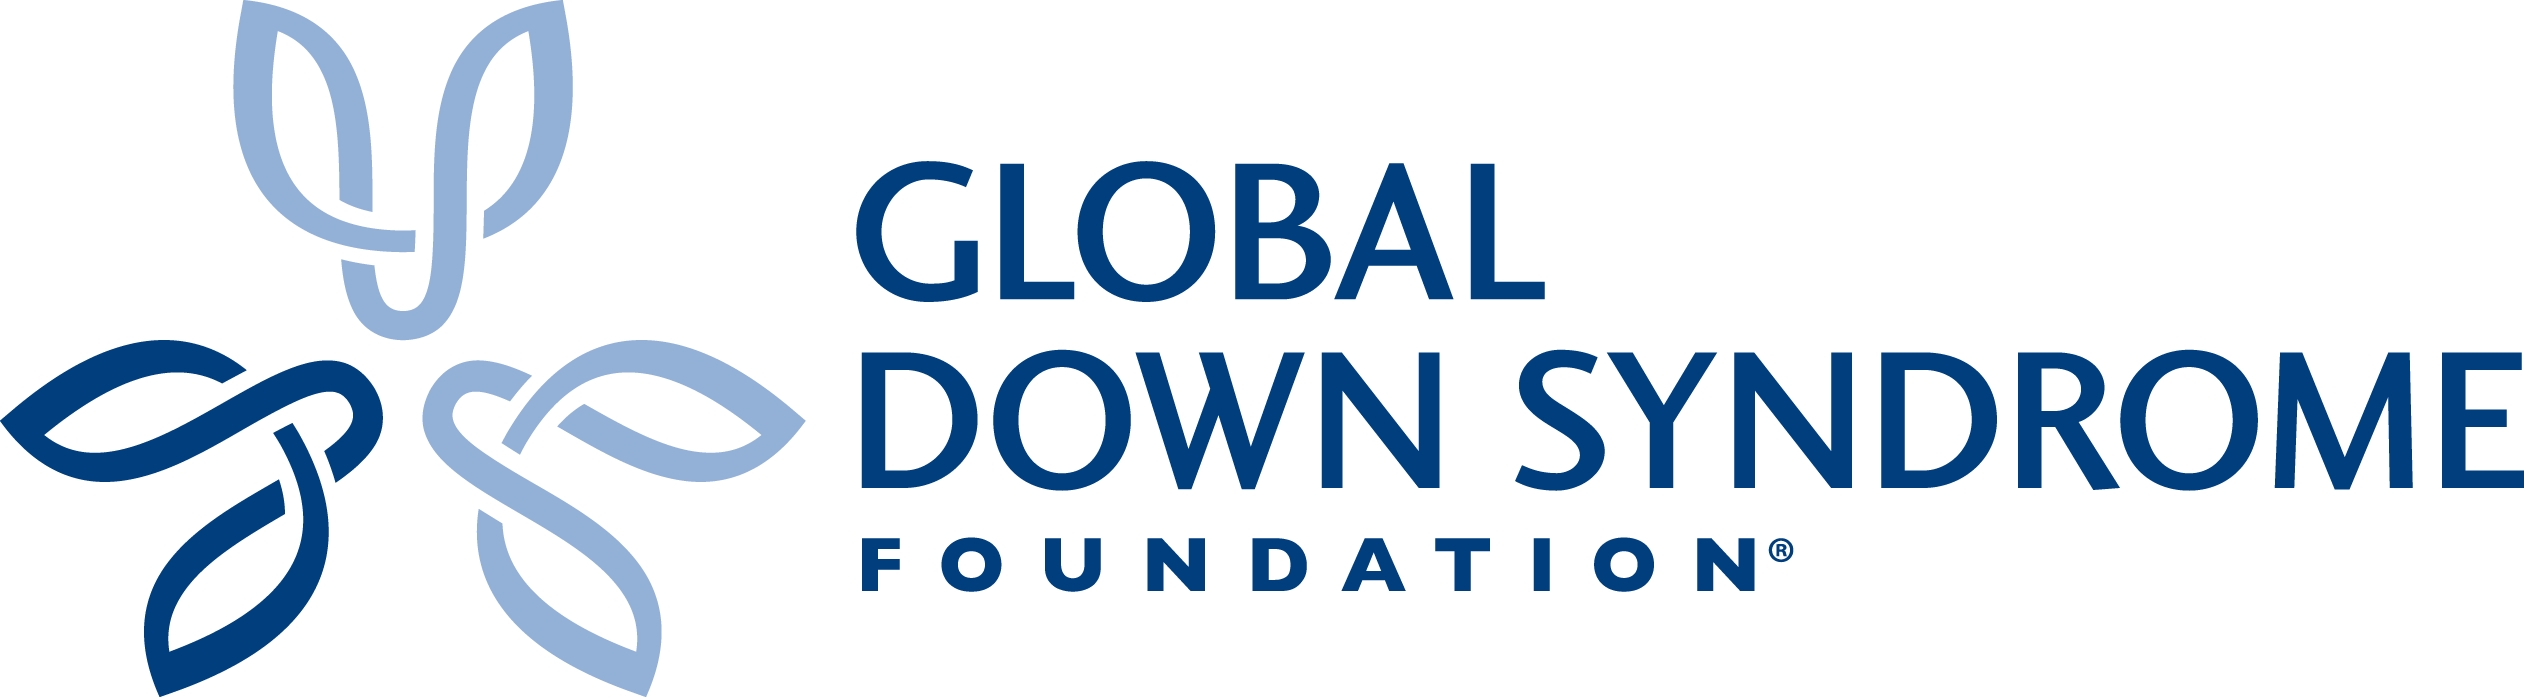 Partners - Global Down Syndrome Foundation Logo